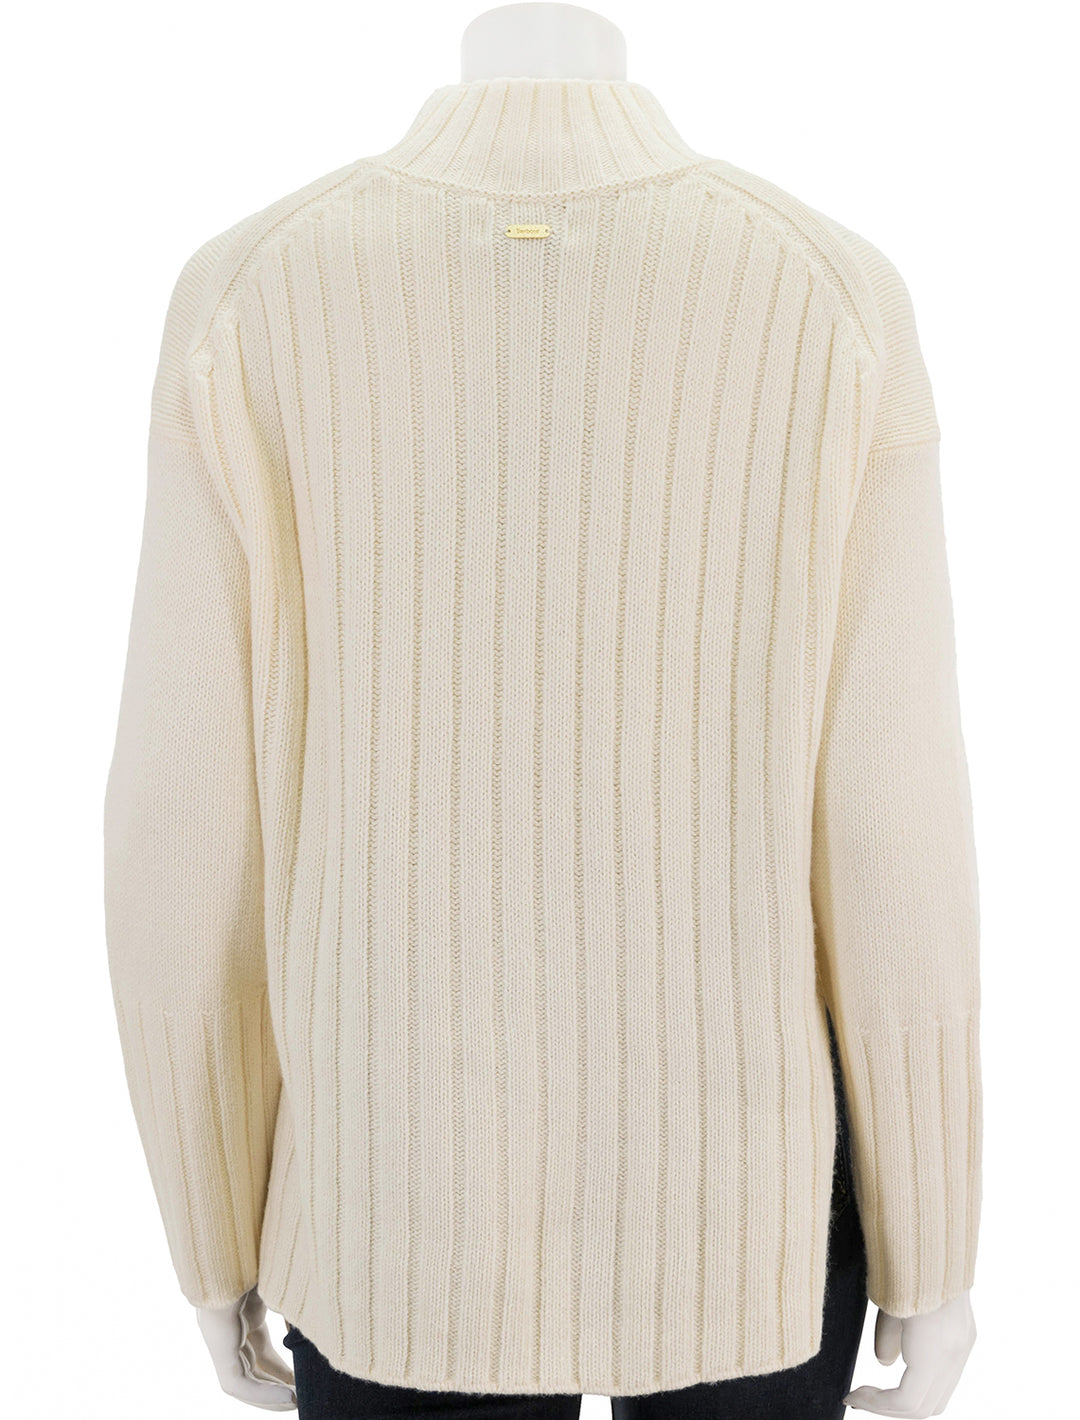 Back view of Barbour's winona pullover in antique white.